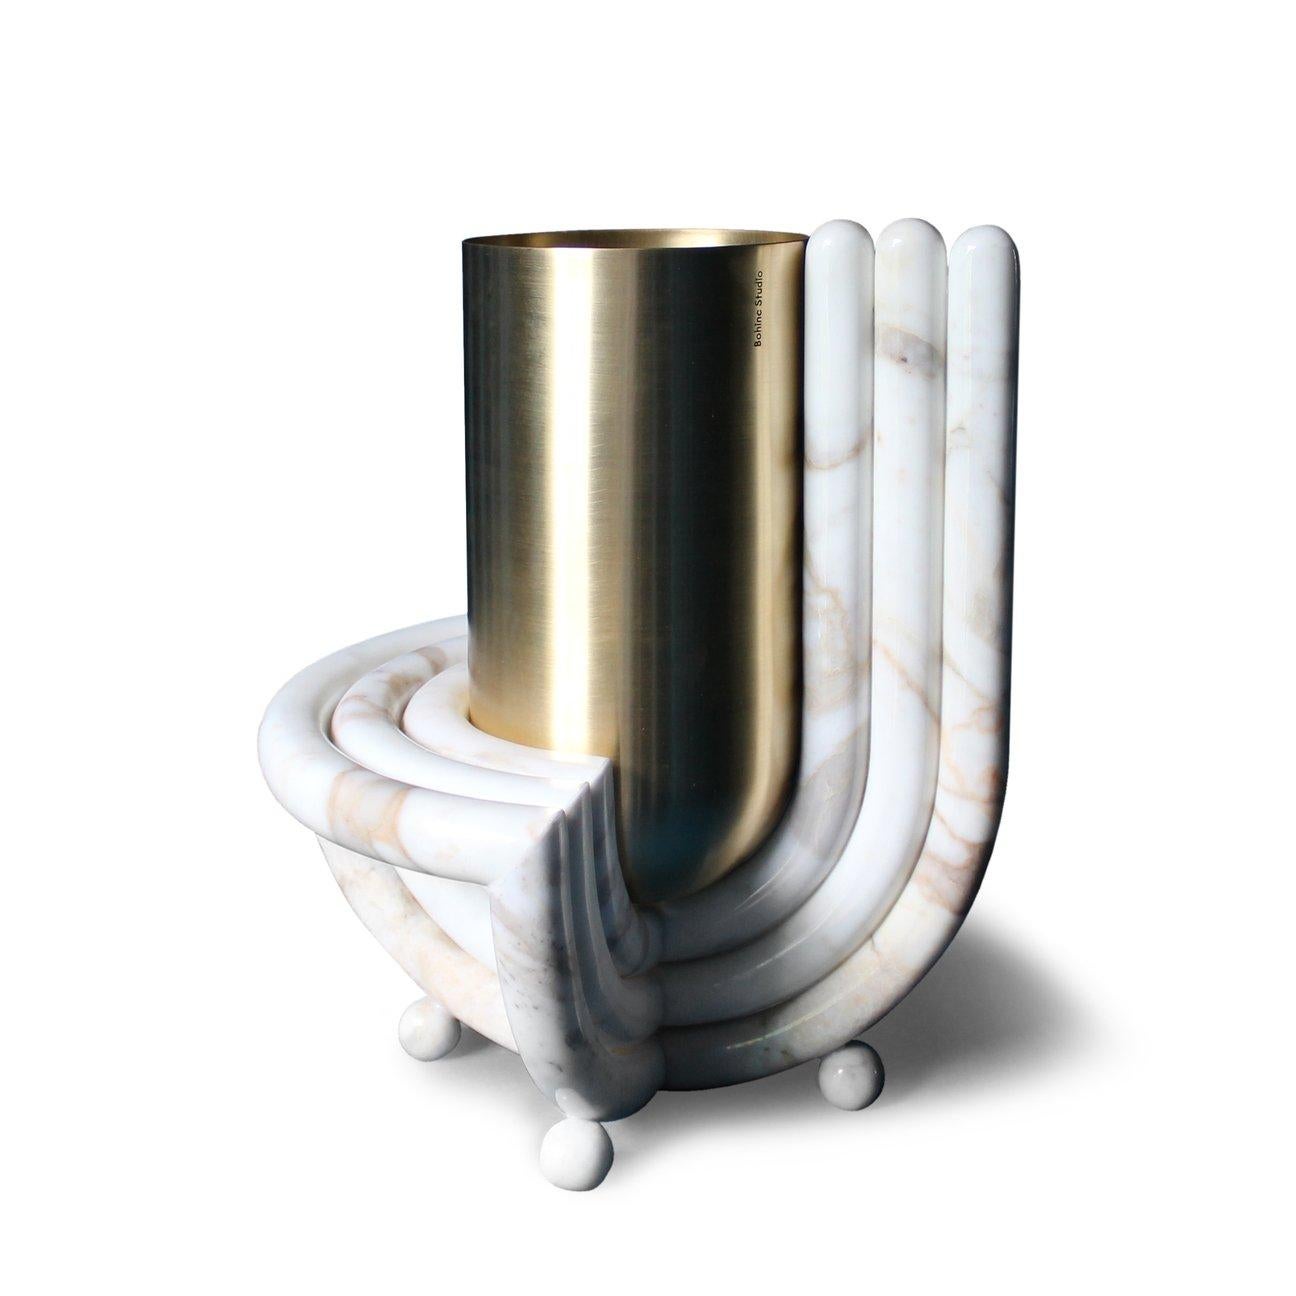 Named after the planet Jupiter, the new Jupiter vase features a brass bullet shaped vase and a base in 3-D milled Carrara marble. The vase can be removed from its rainbow shaped base.

Handmade in Italy using a mix of handmade metalwork and 3-D